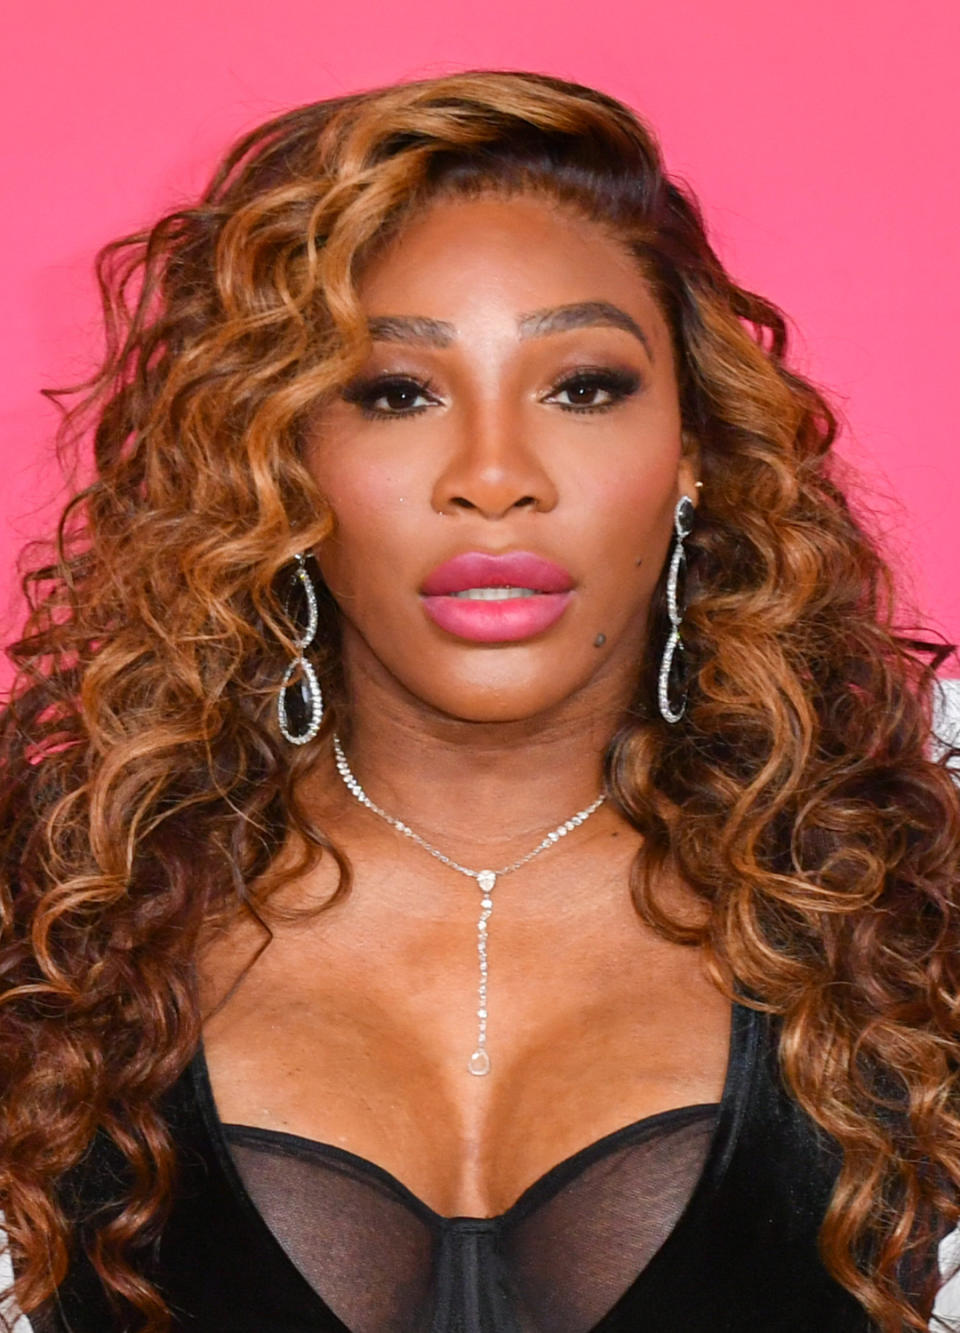 Serena Williams arrives to the 54th Annual NAACP Image Awards at Pasadena Civic Auditorium on February 25, 2023 in Pasadena, California